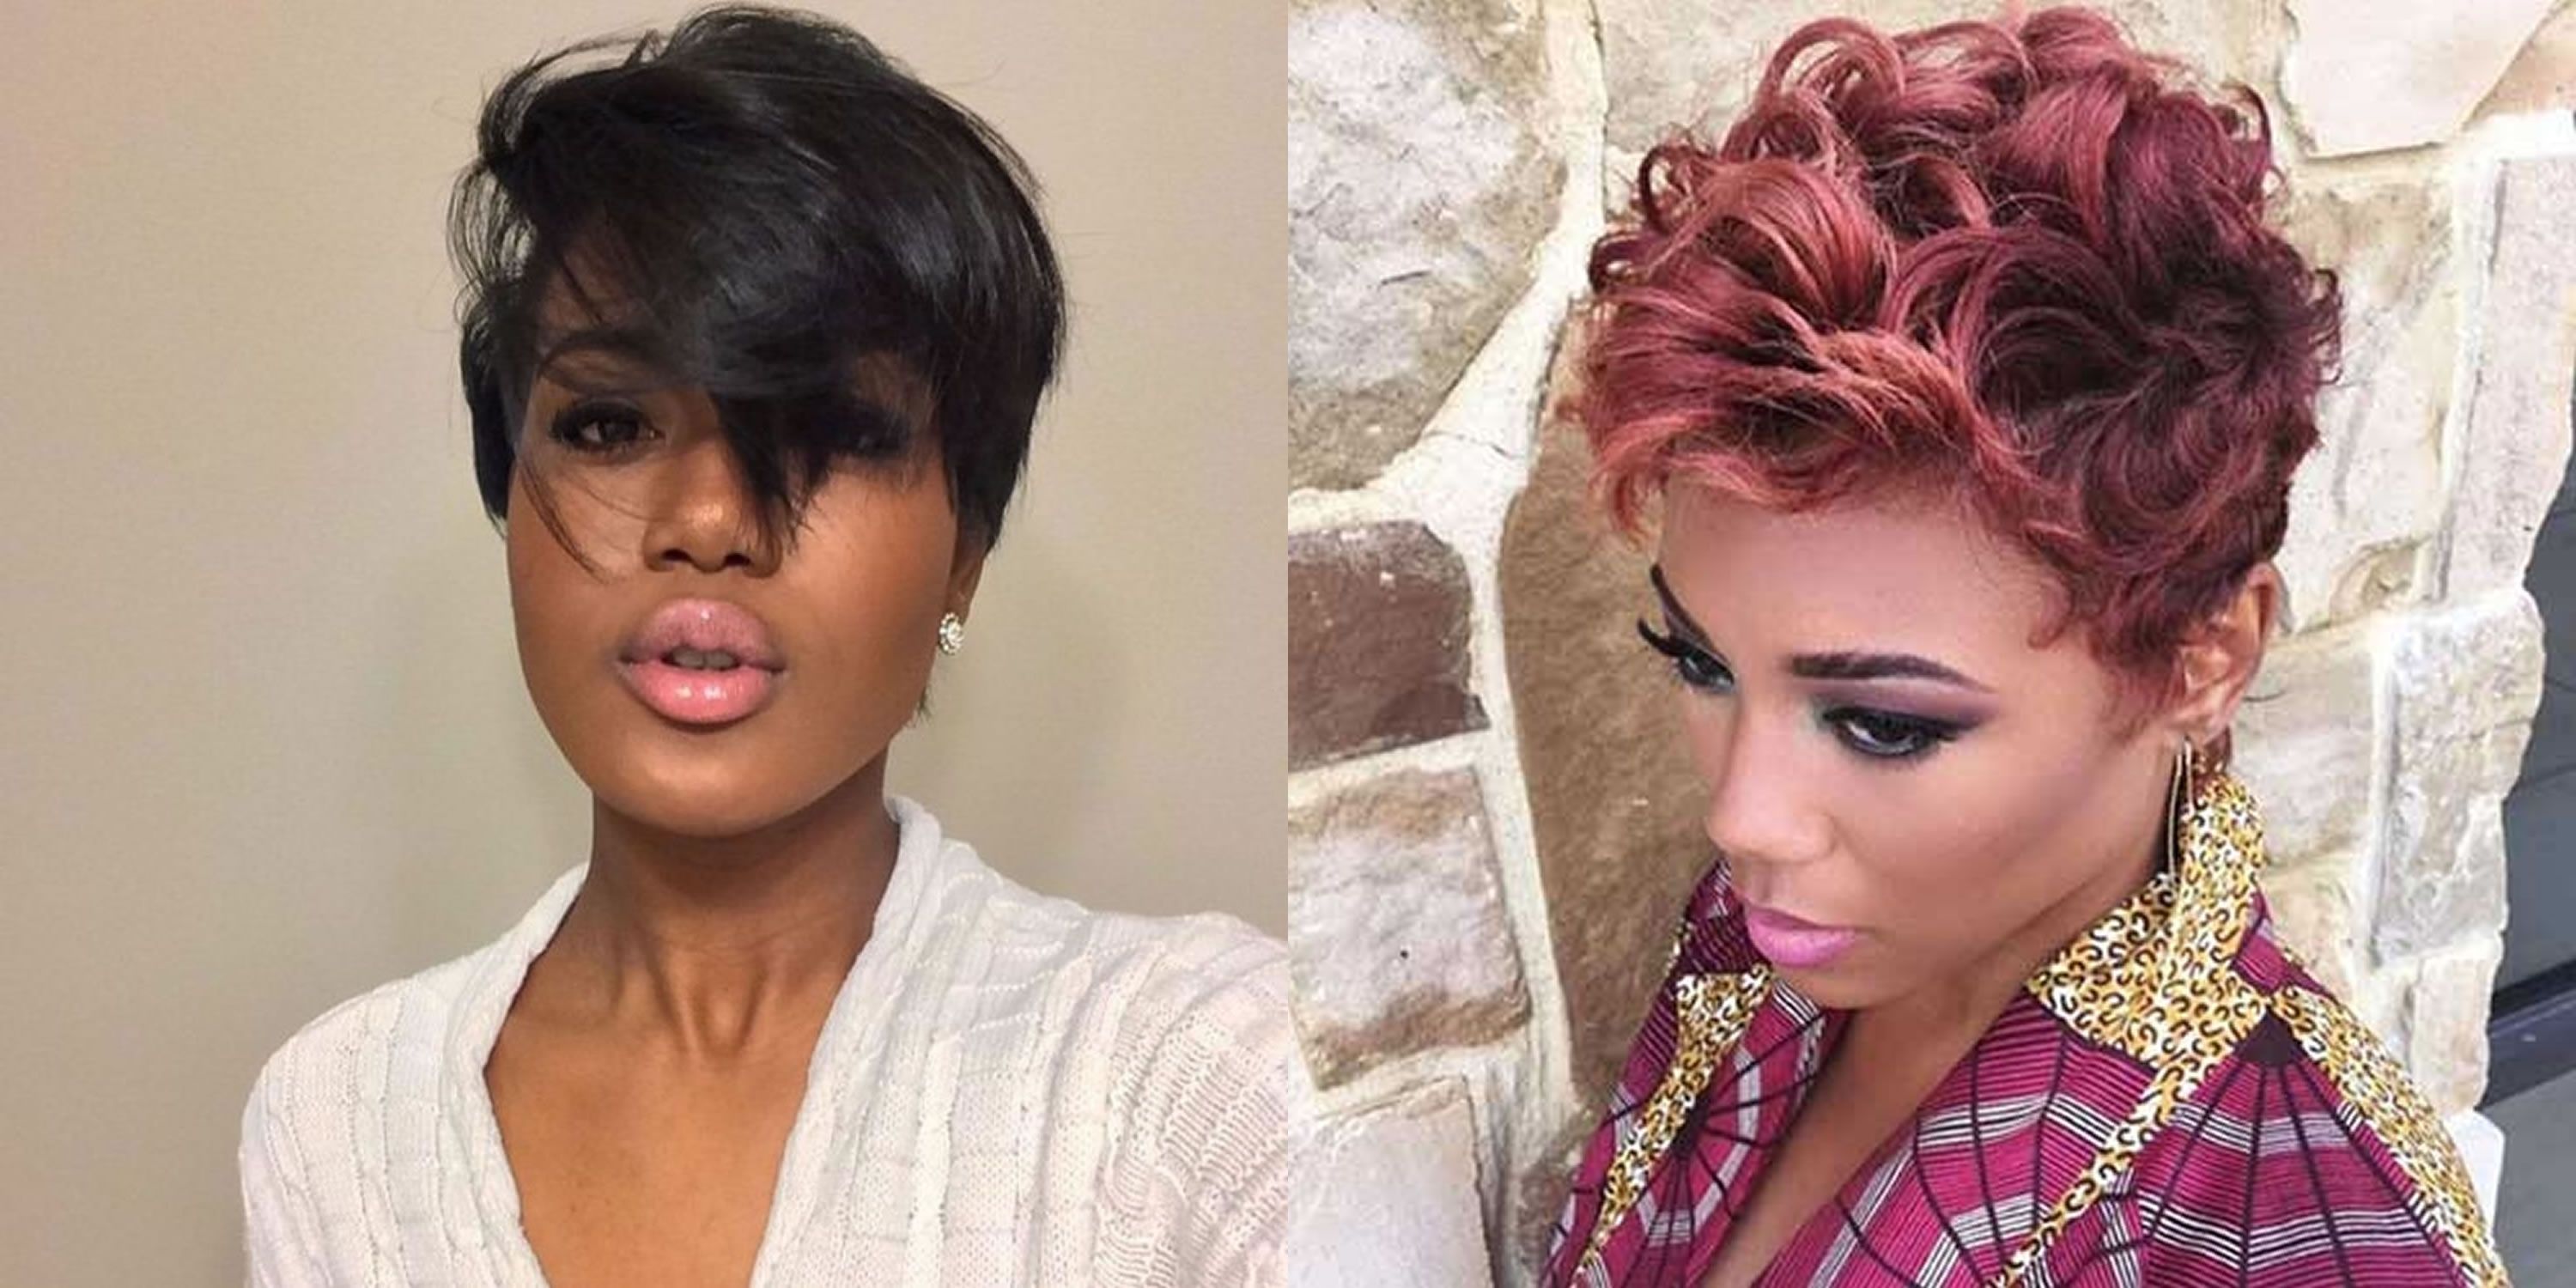 Pixie Hairstyles For Black Women – 60 Cool Short Haircuts For 2017 Throughout Most Current Pixie Hairstyles For Black Girl (View 8 of 15)